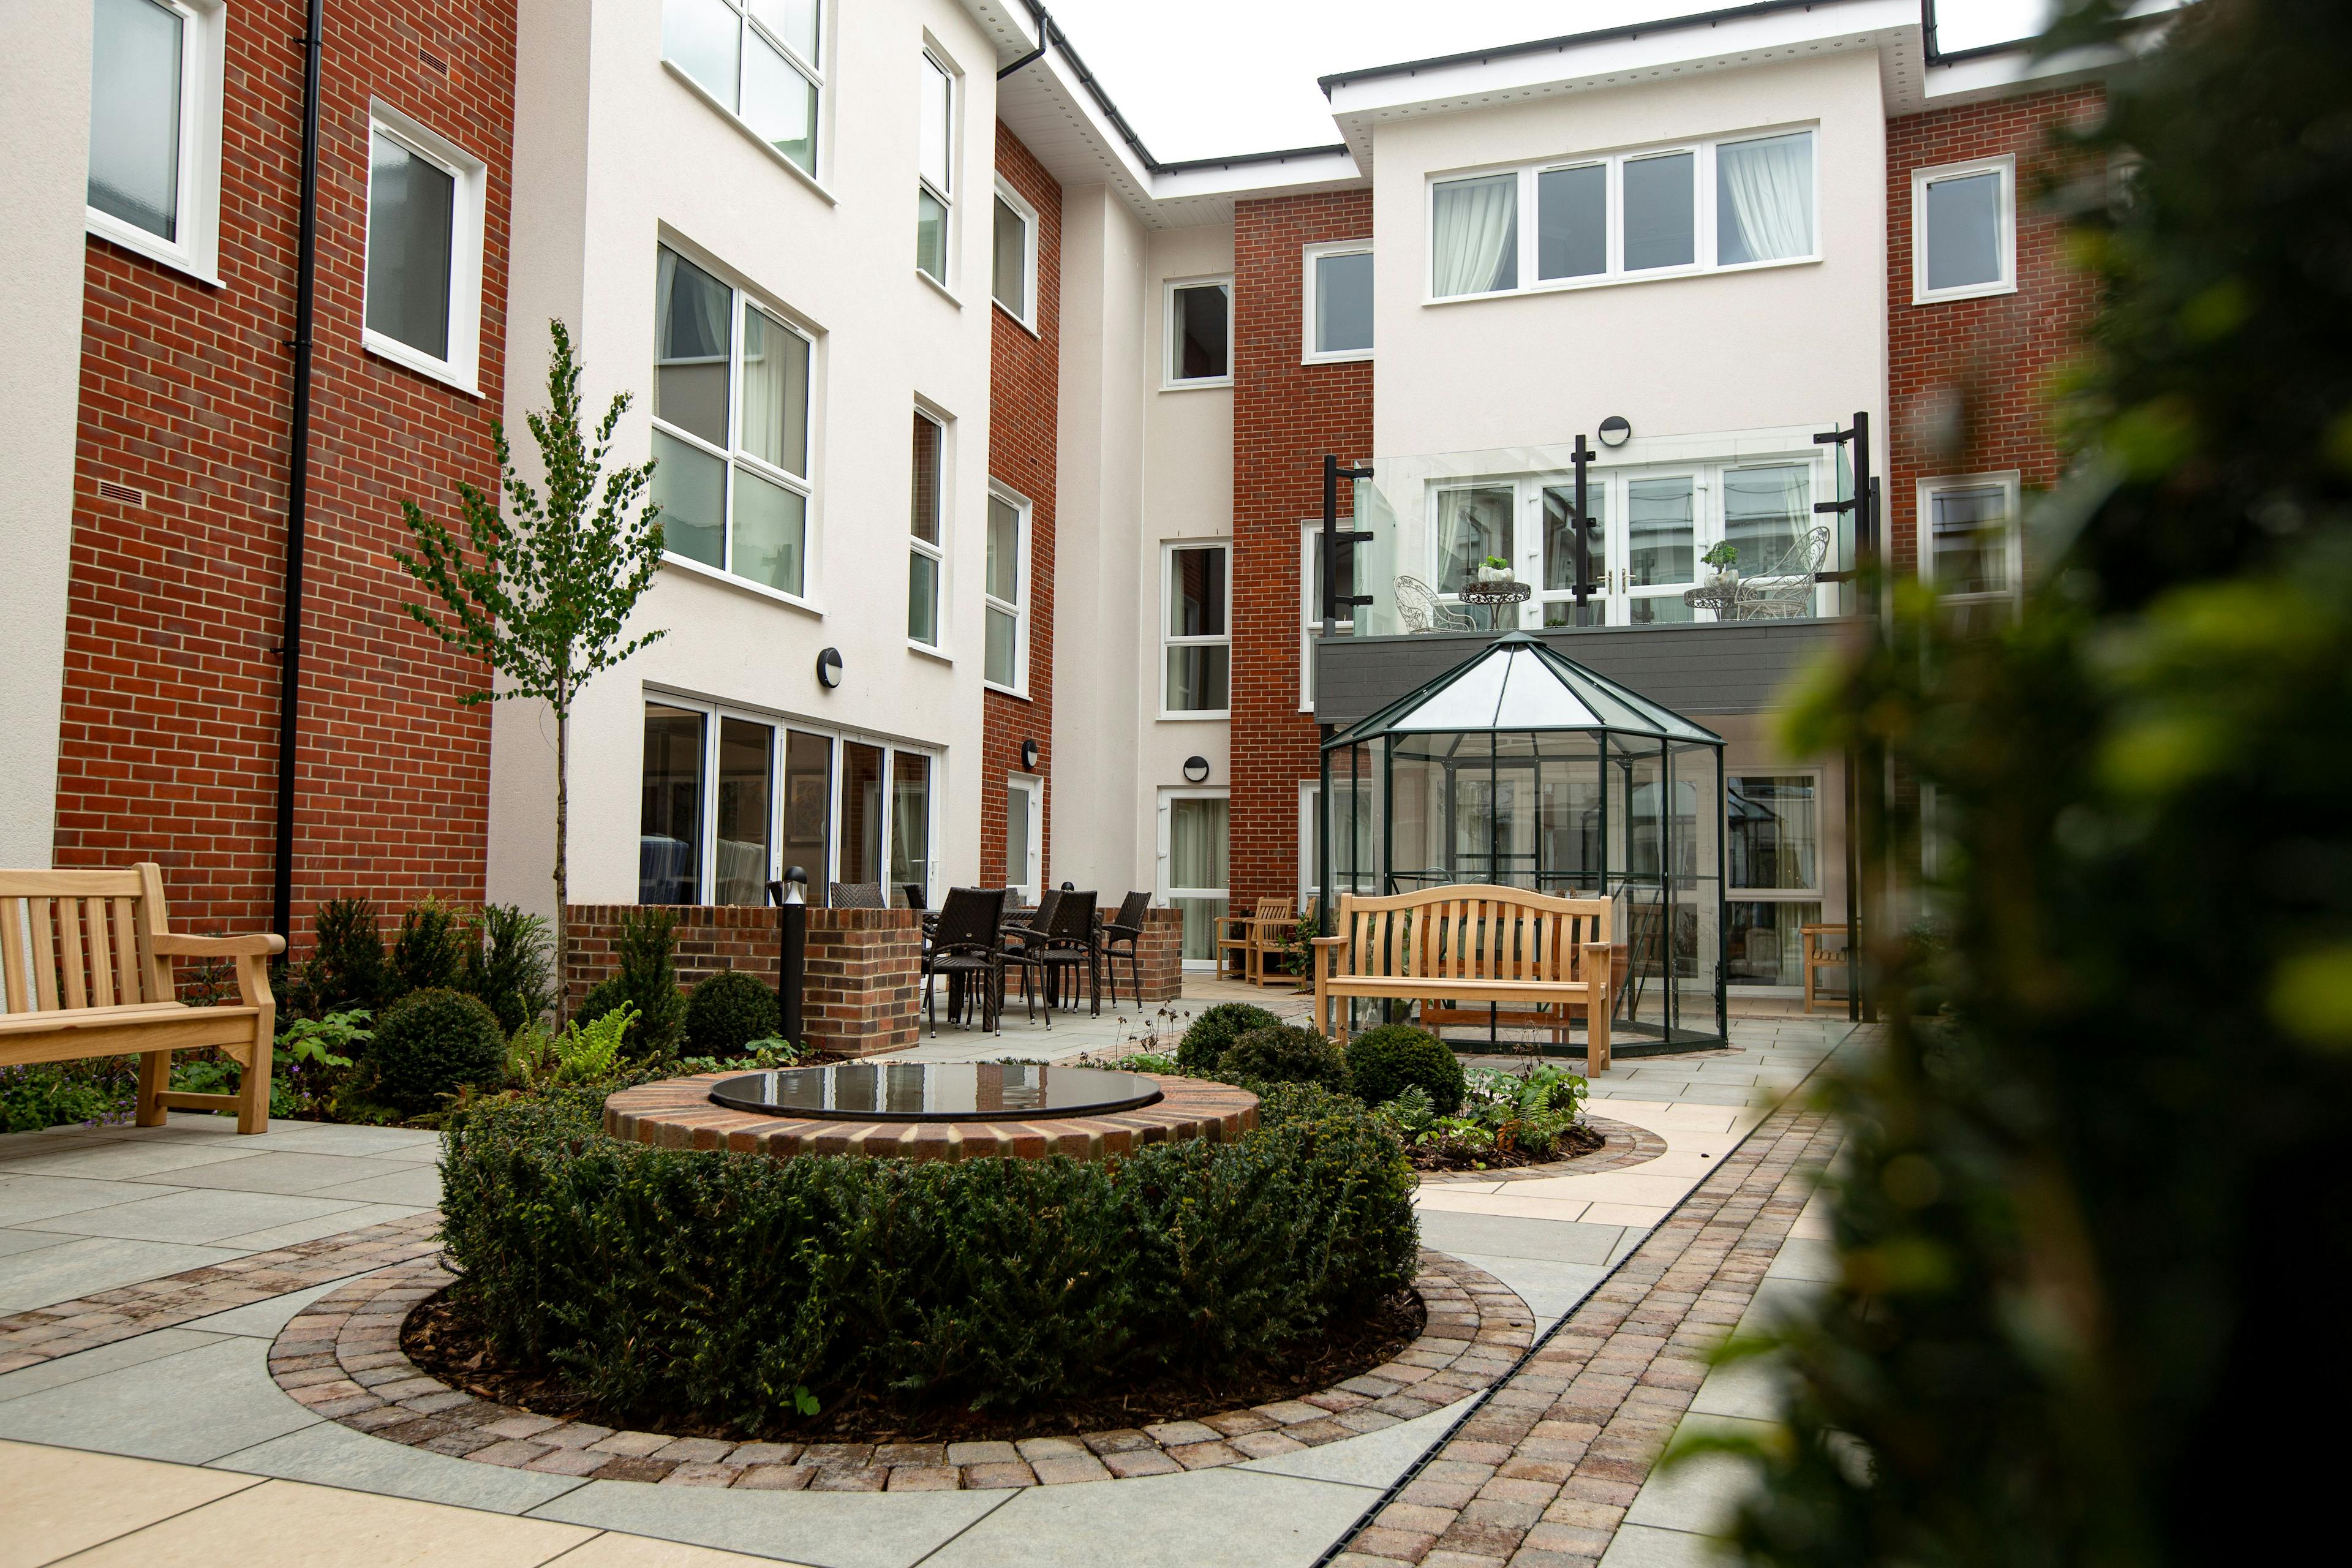 Exterior of Candlewood House care home in Harrow, Greater London